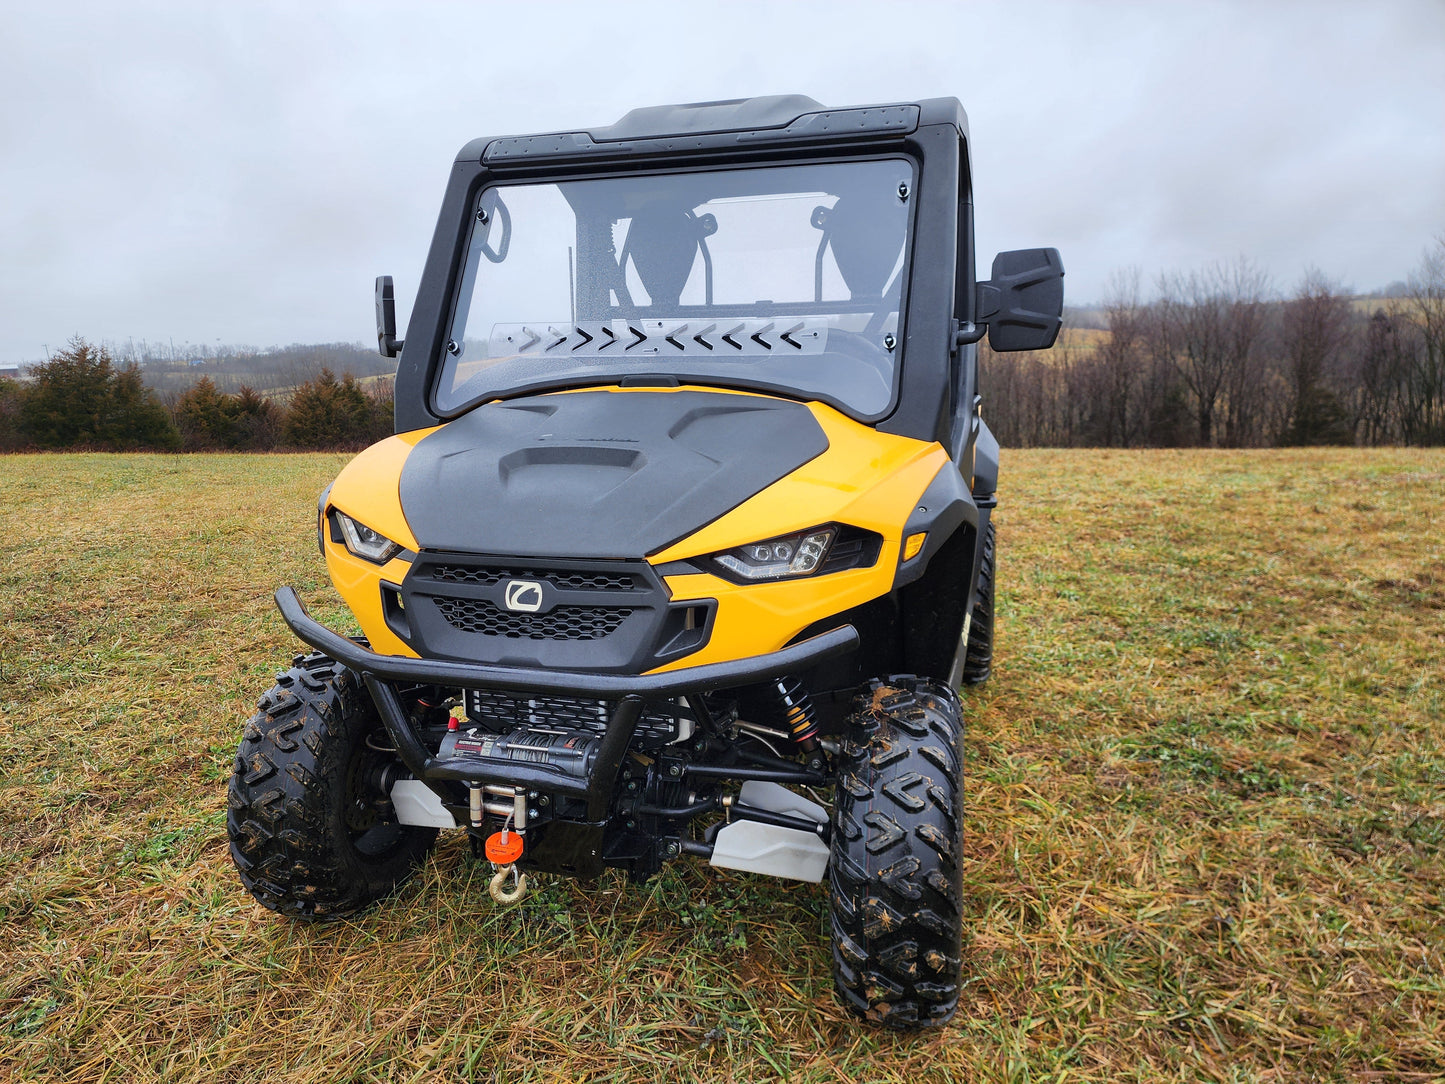 Cub Cadet Challenger MX550/750 - 1 Pc Windshield with Optional Scratch-Resistant Coating and Vents - 3 Star UTV